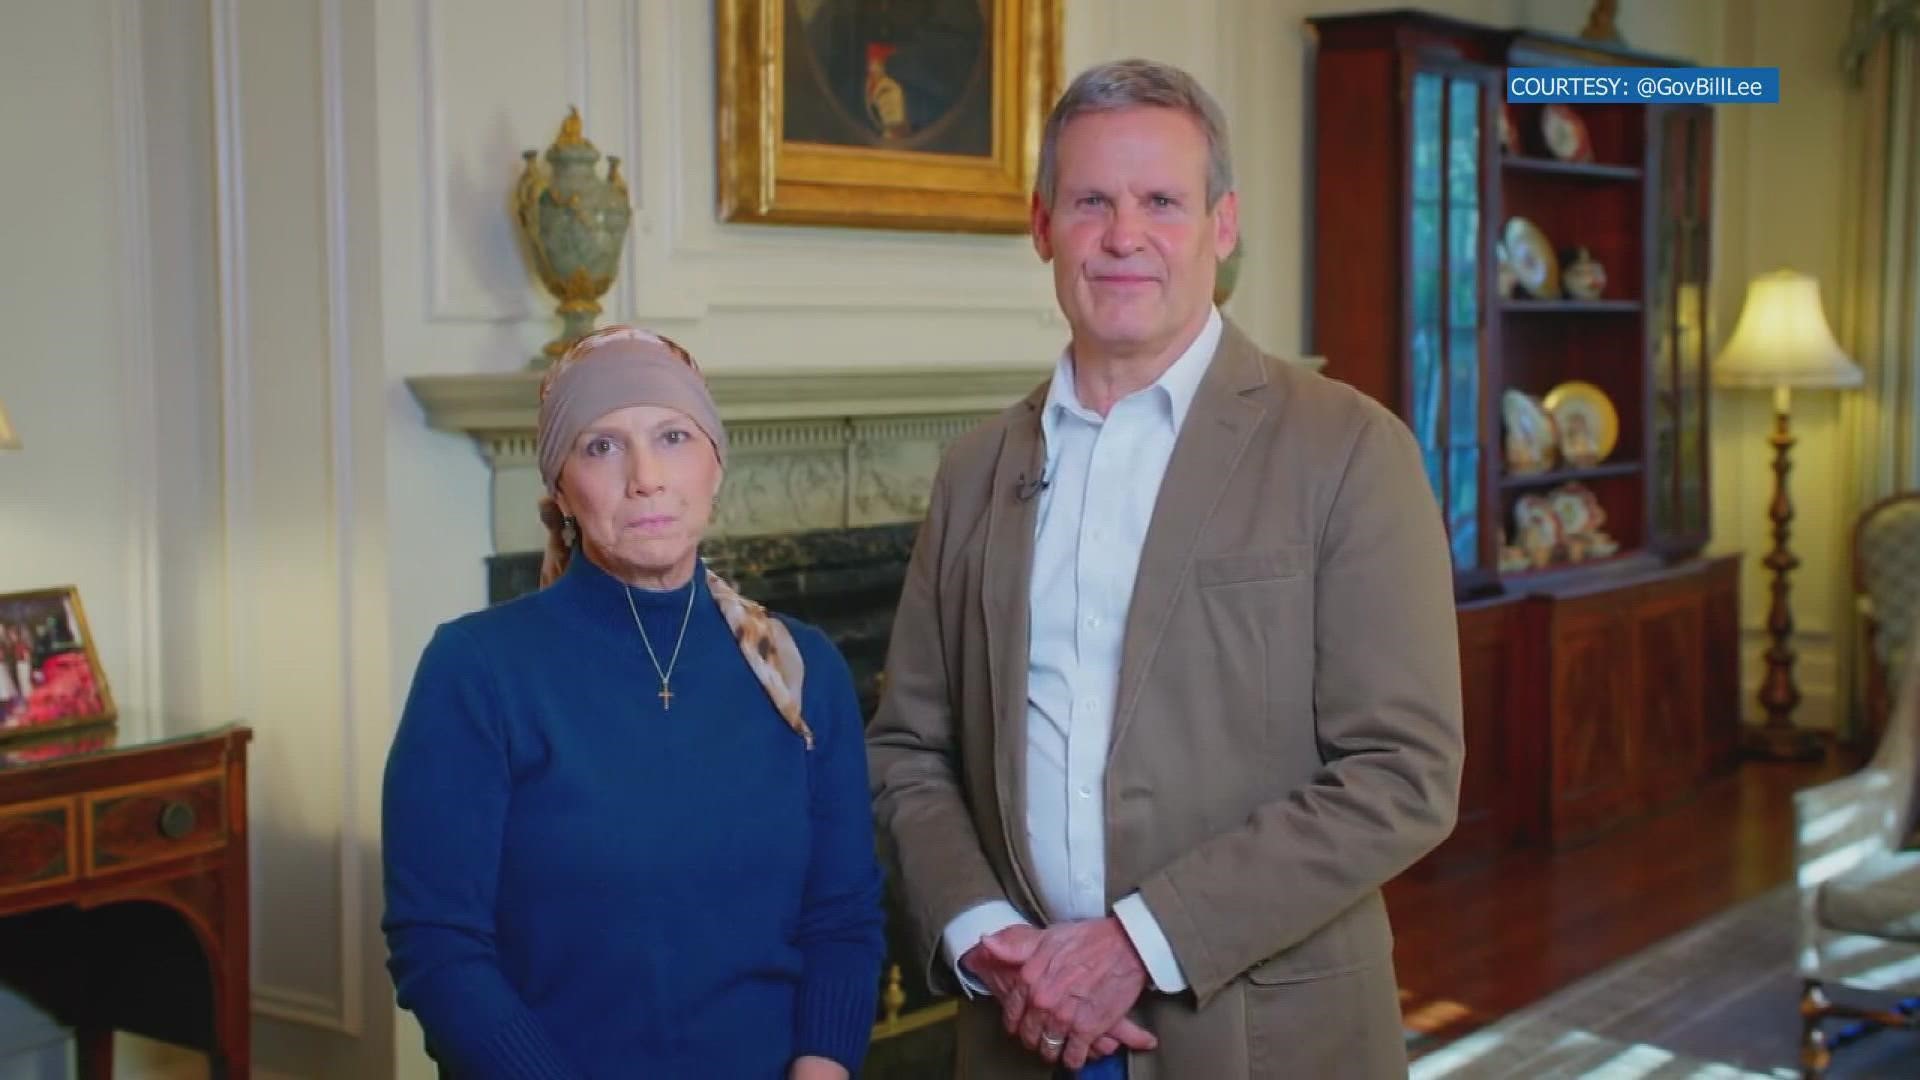 Governor Bill Lee and First lady Maria Lee posted this video on Twitter, wishing Tennesseans a happy Thanksgiving.